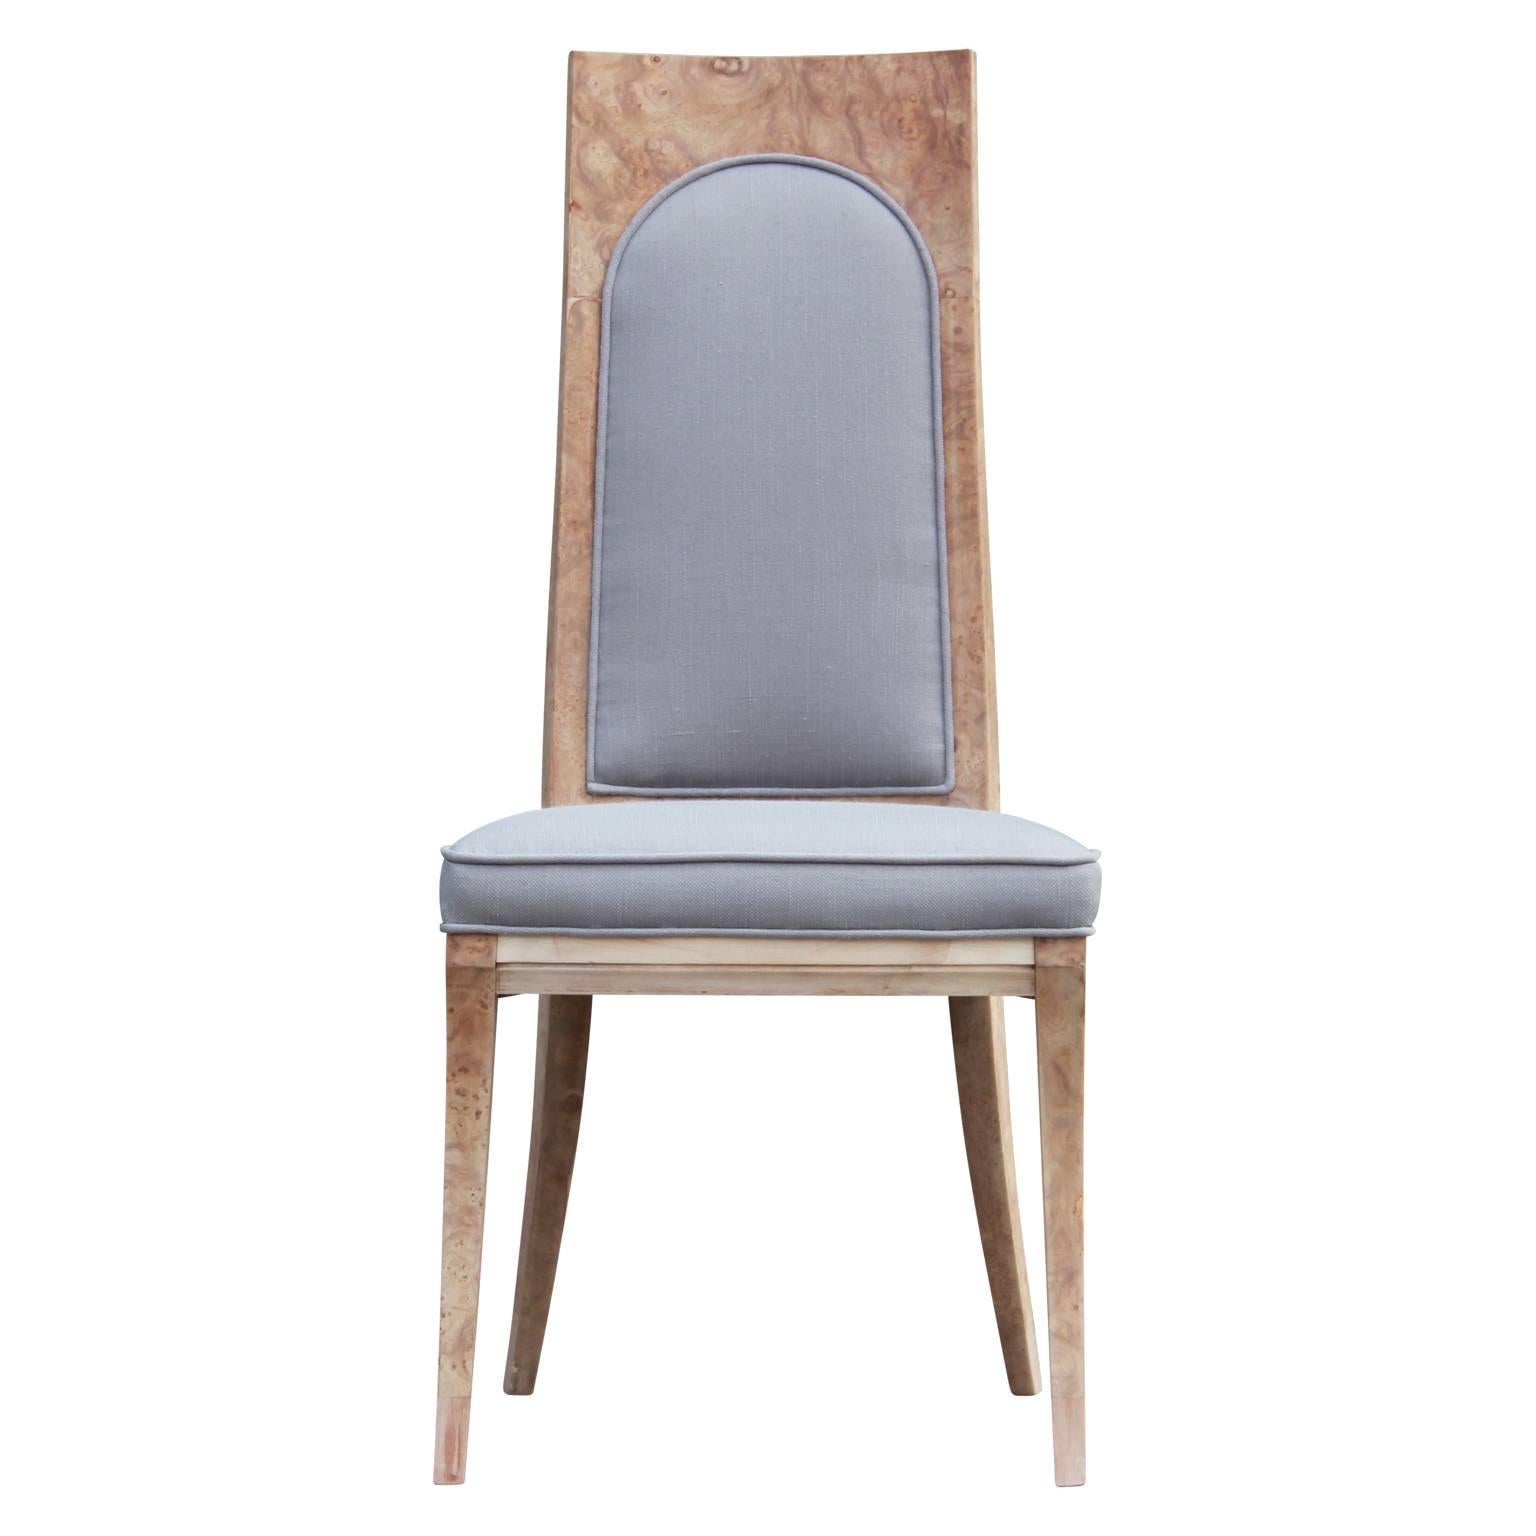 Stunning set of eight modern or Hollywood Regency dining chairs by Mastercraft freshly reupholstered in a light grey woven fabric and bleached burl or carpathian elmwood. The two end chairs have arms while the remaining six are armless.